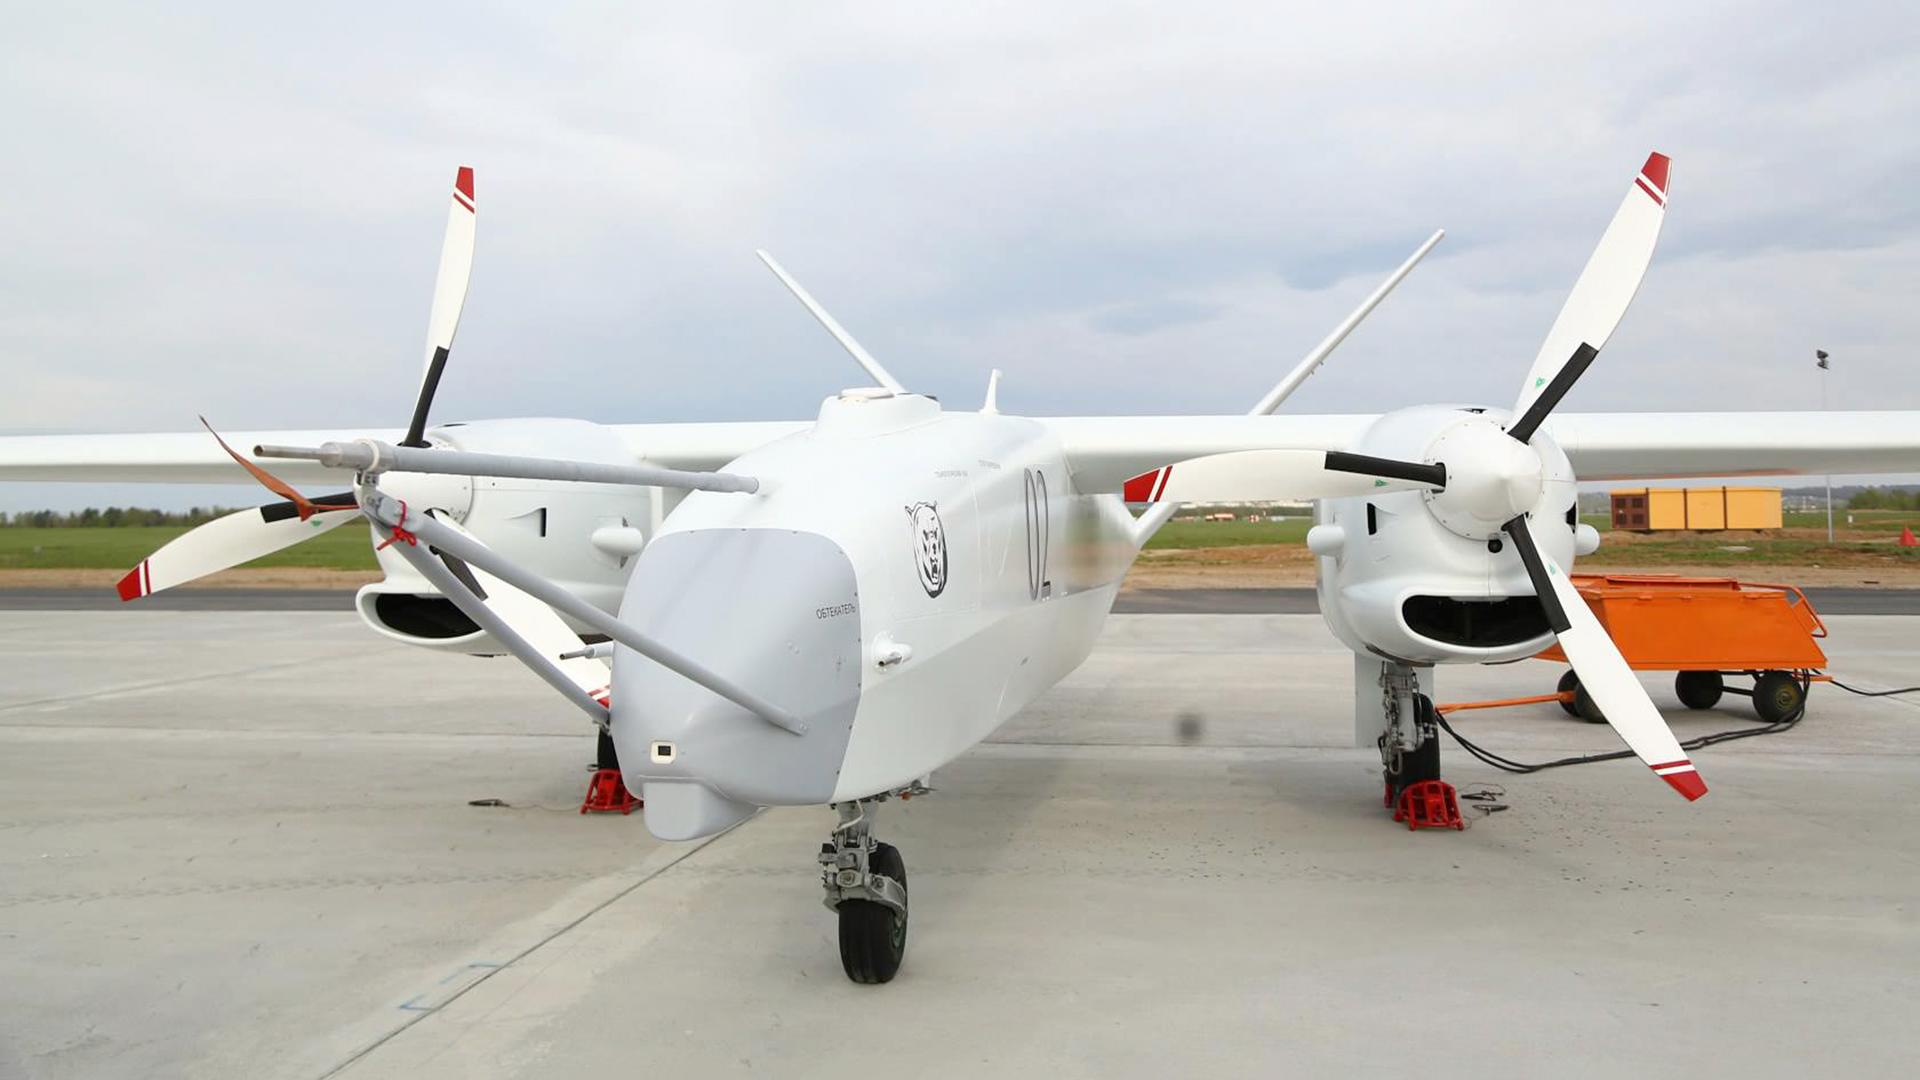 For 11 years Russia has been unable to create the Altius drone, which should surpass the Bayraktar TB2 and MQ-Reaper - but it stole $17 million